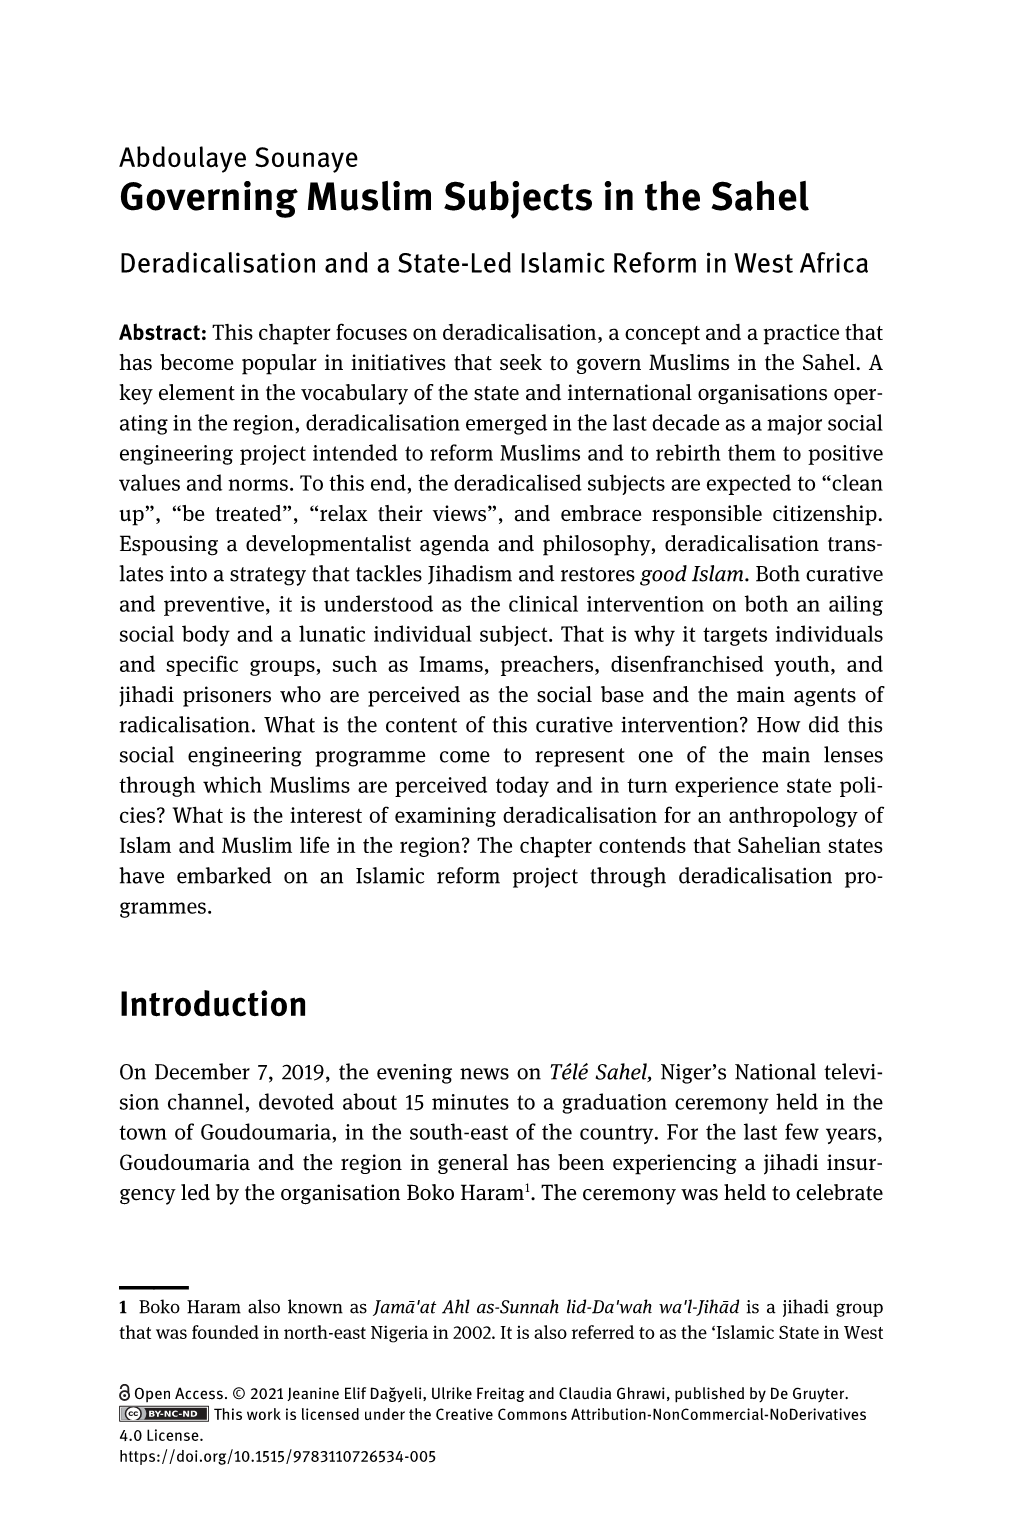 Governing Muslim Subjects in the Sahel